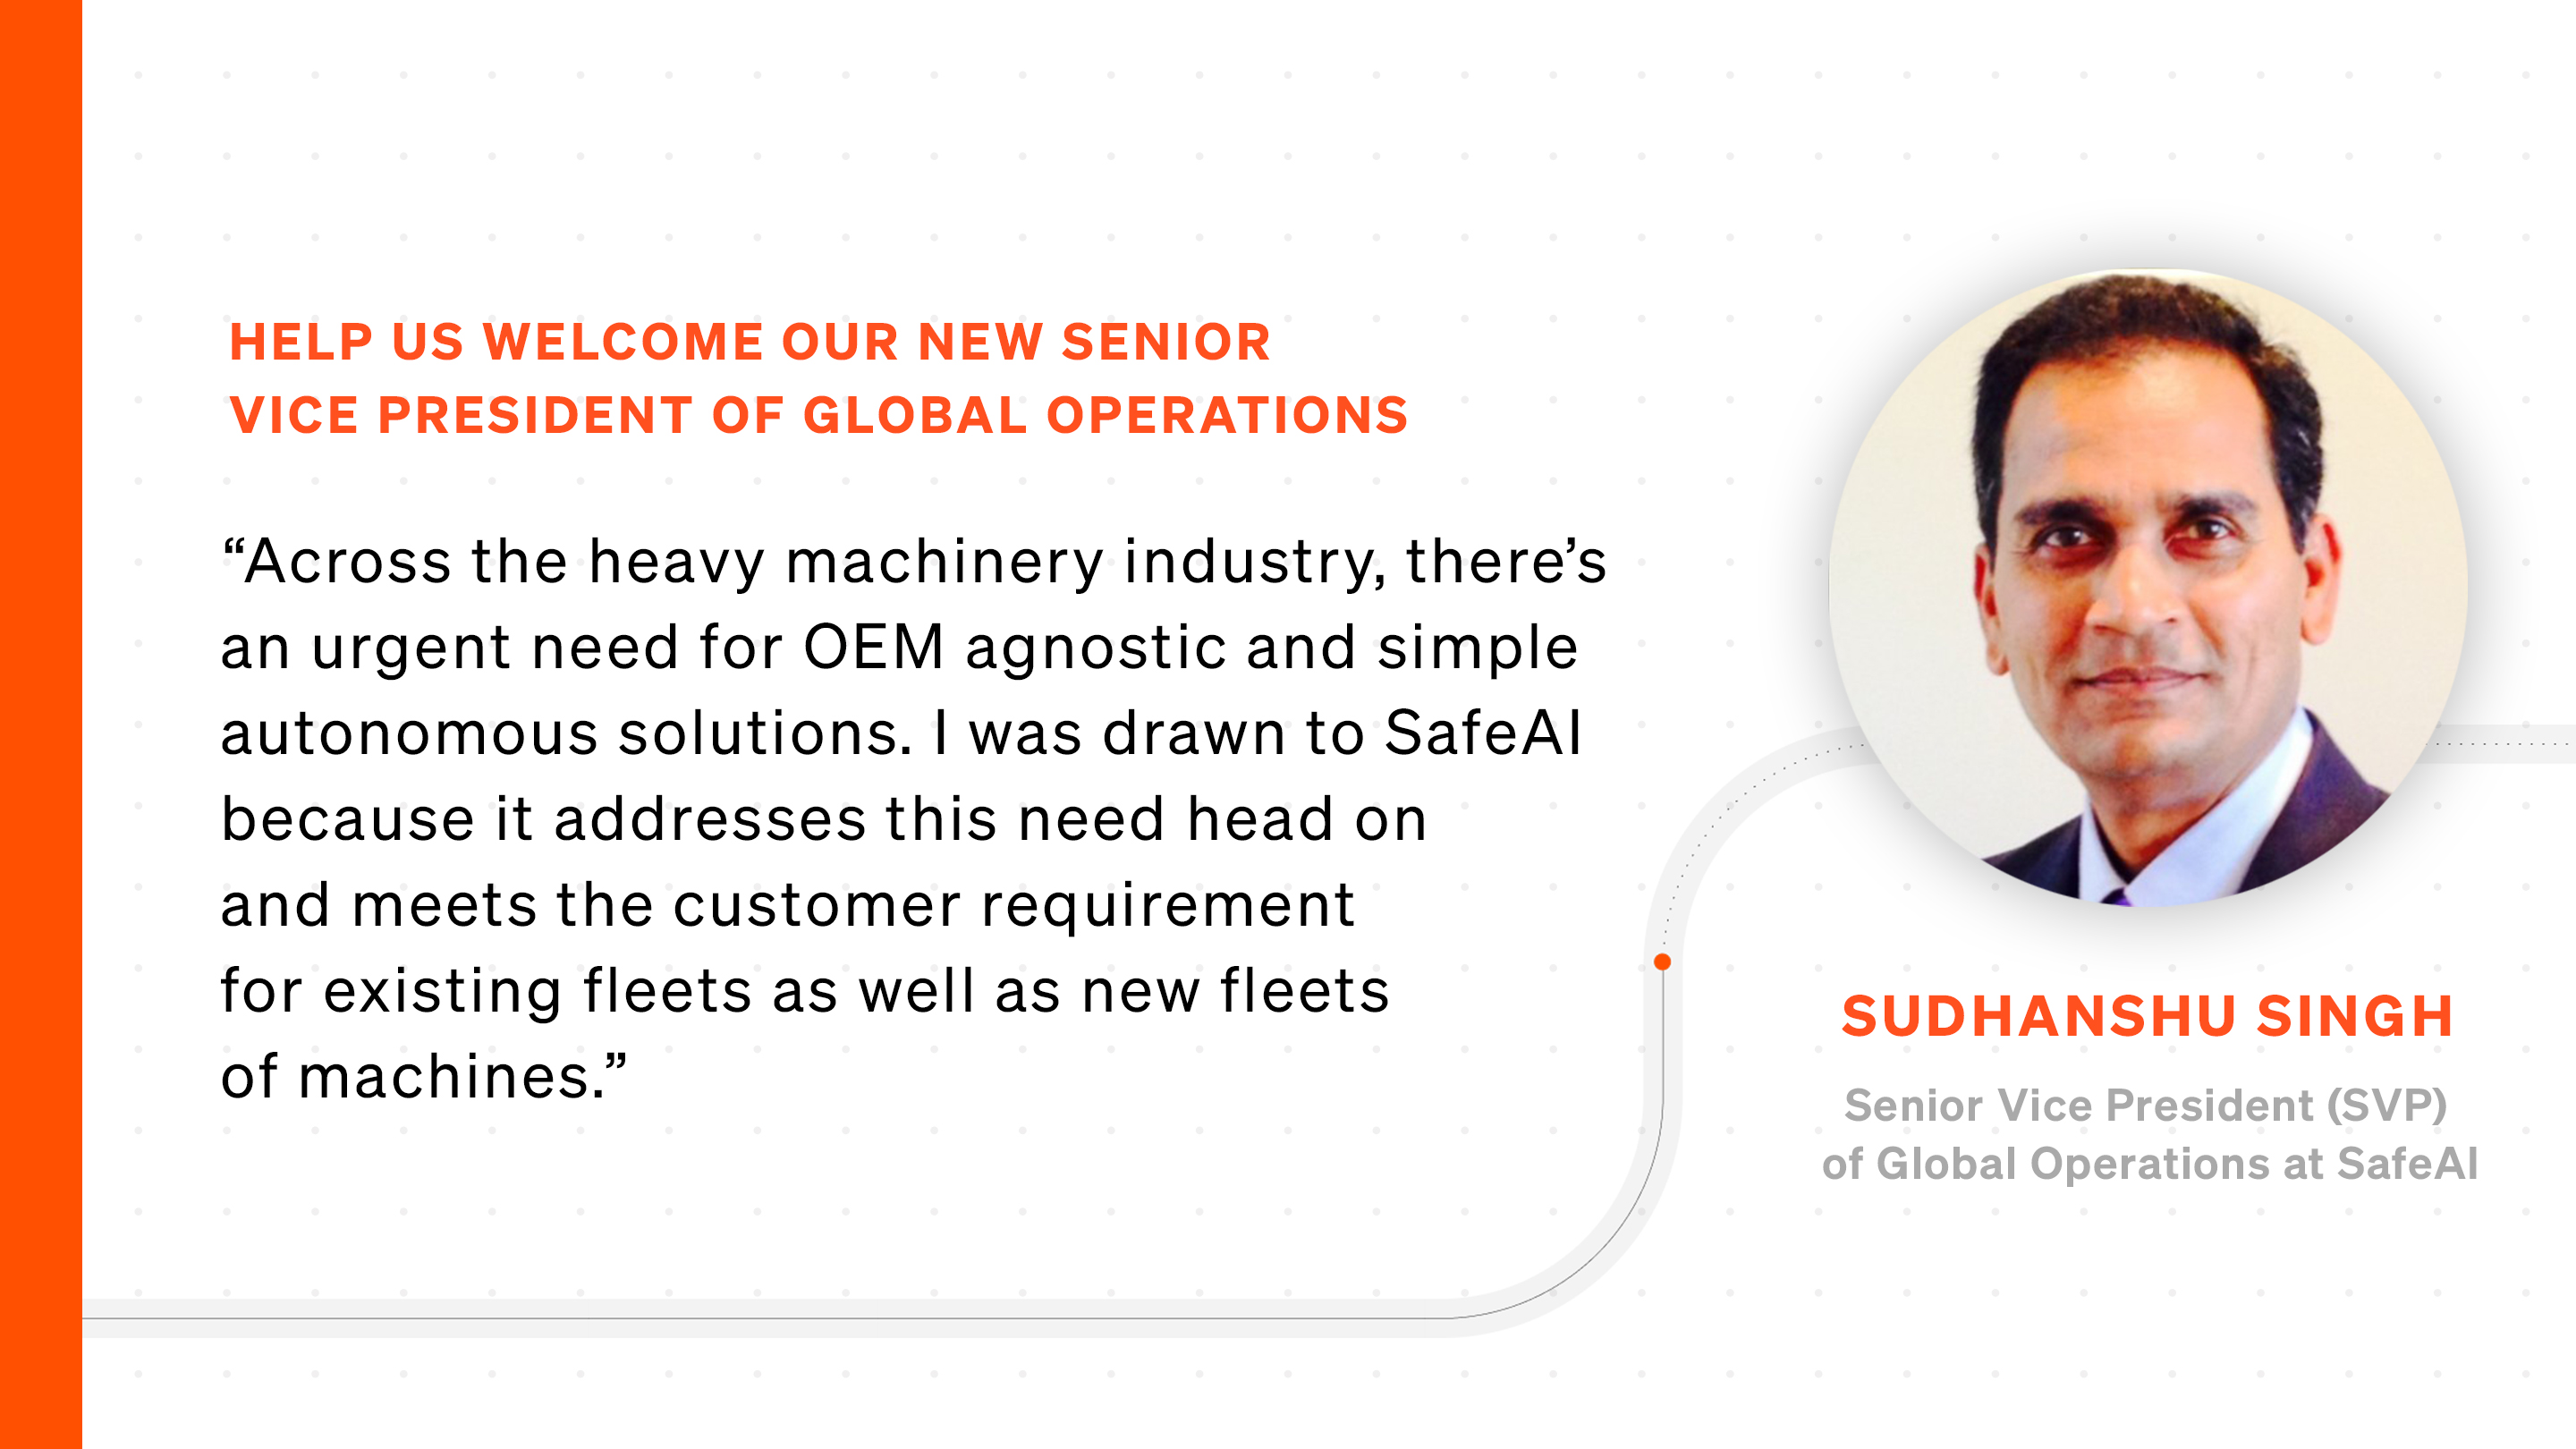 SafeAI Welcomes Senior Vice President of Global Operations